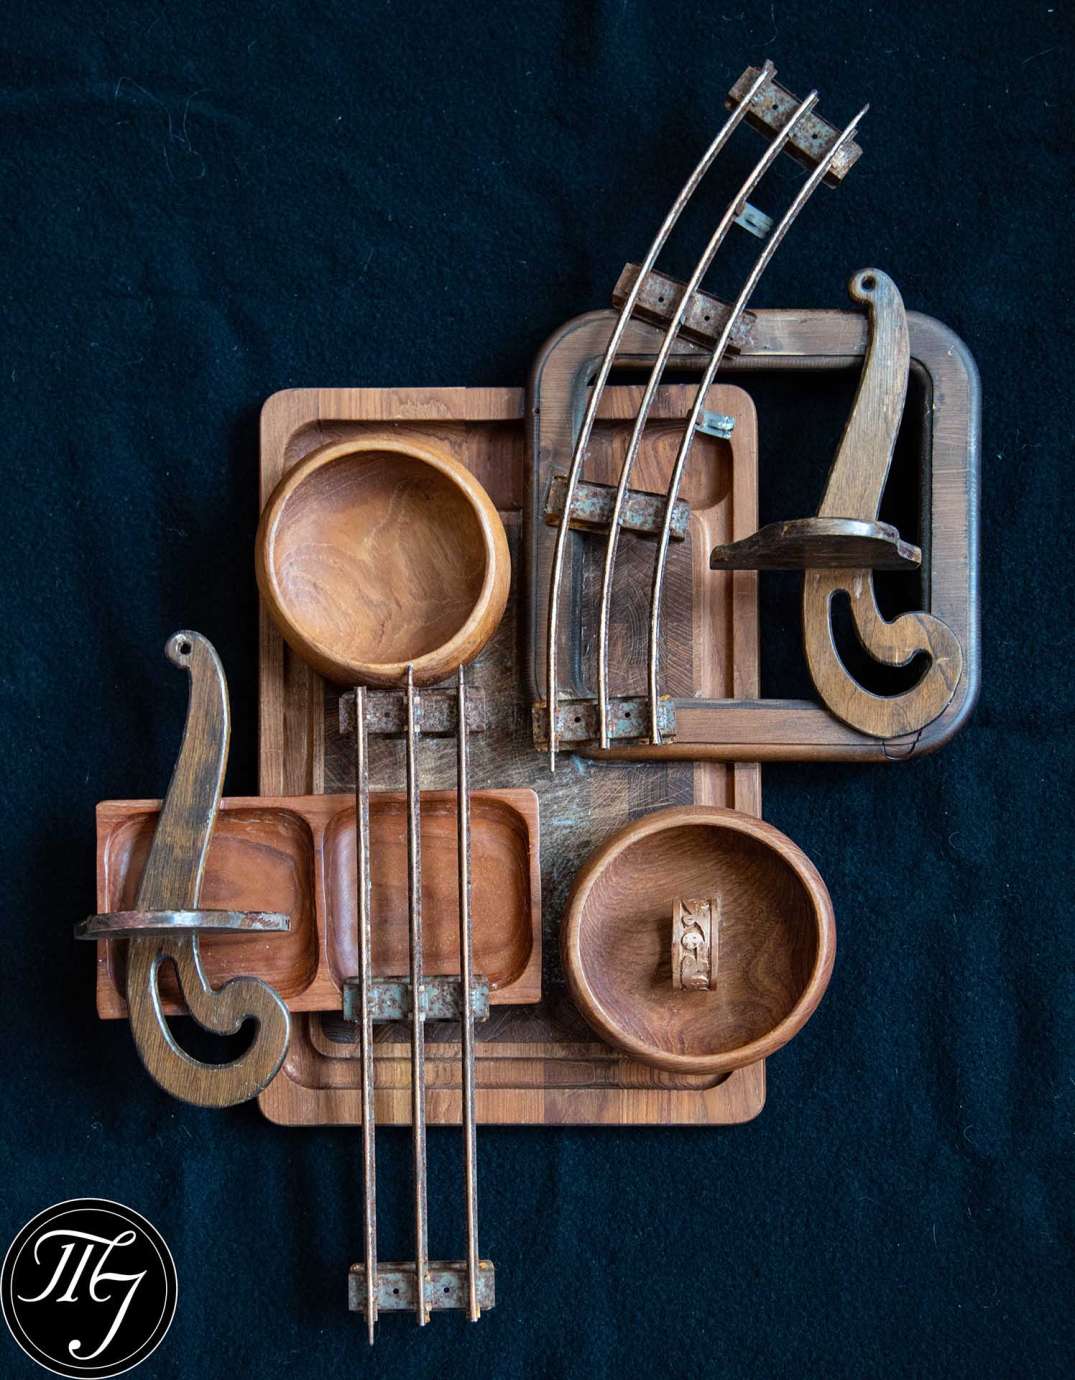 A wood sculpture made out of different shapes made from metal and wood; some resemble wood bowls and pieces of musical instruments